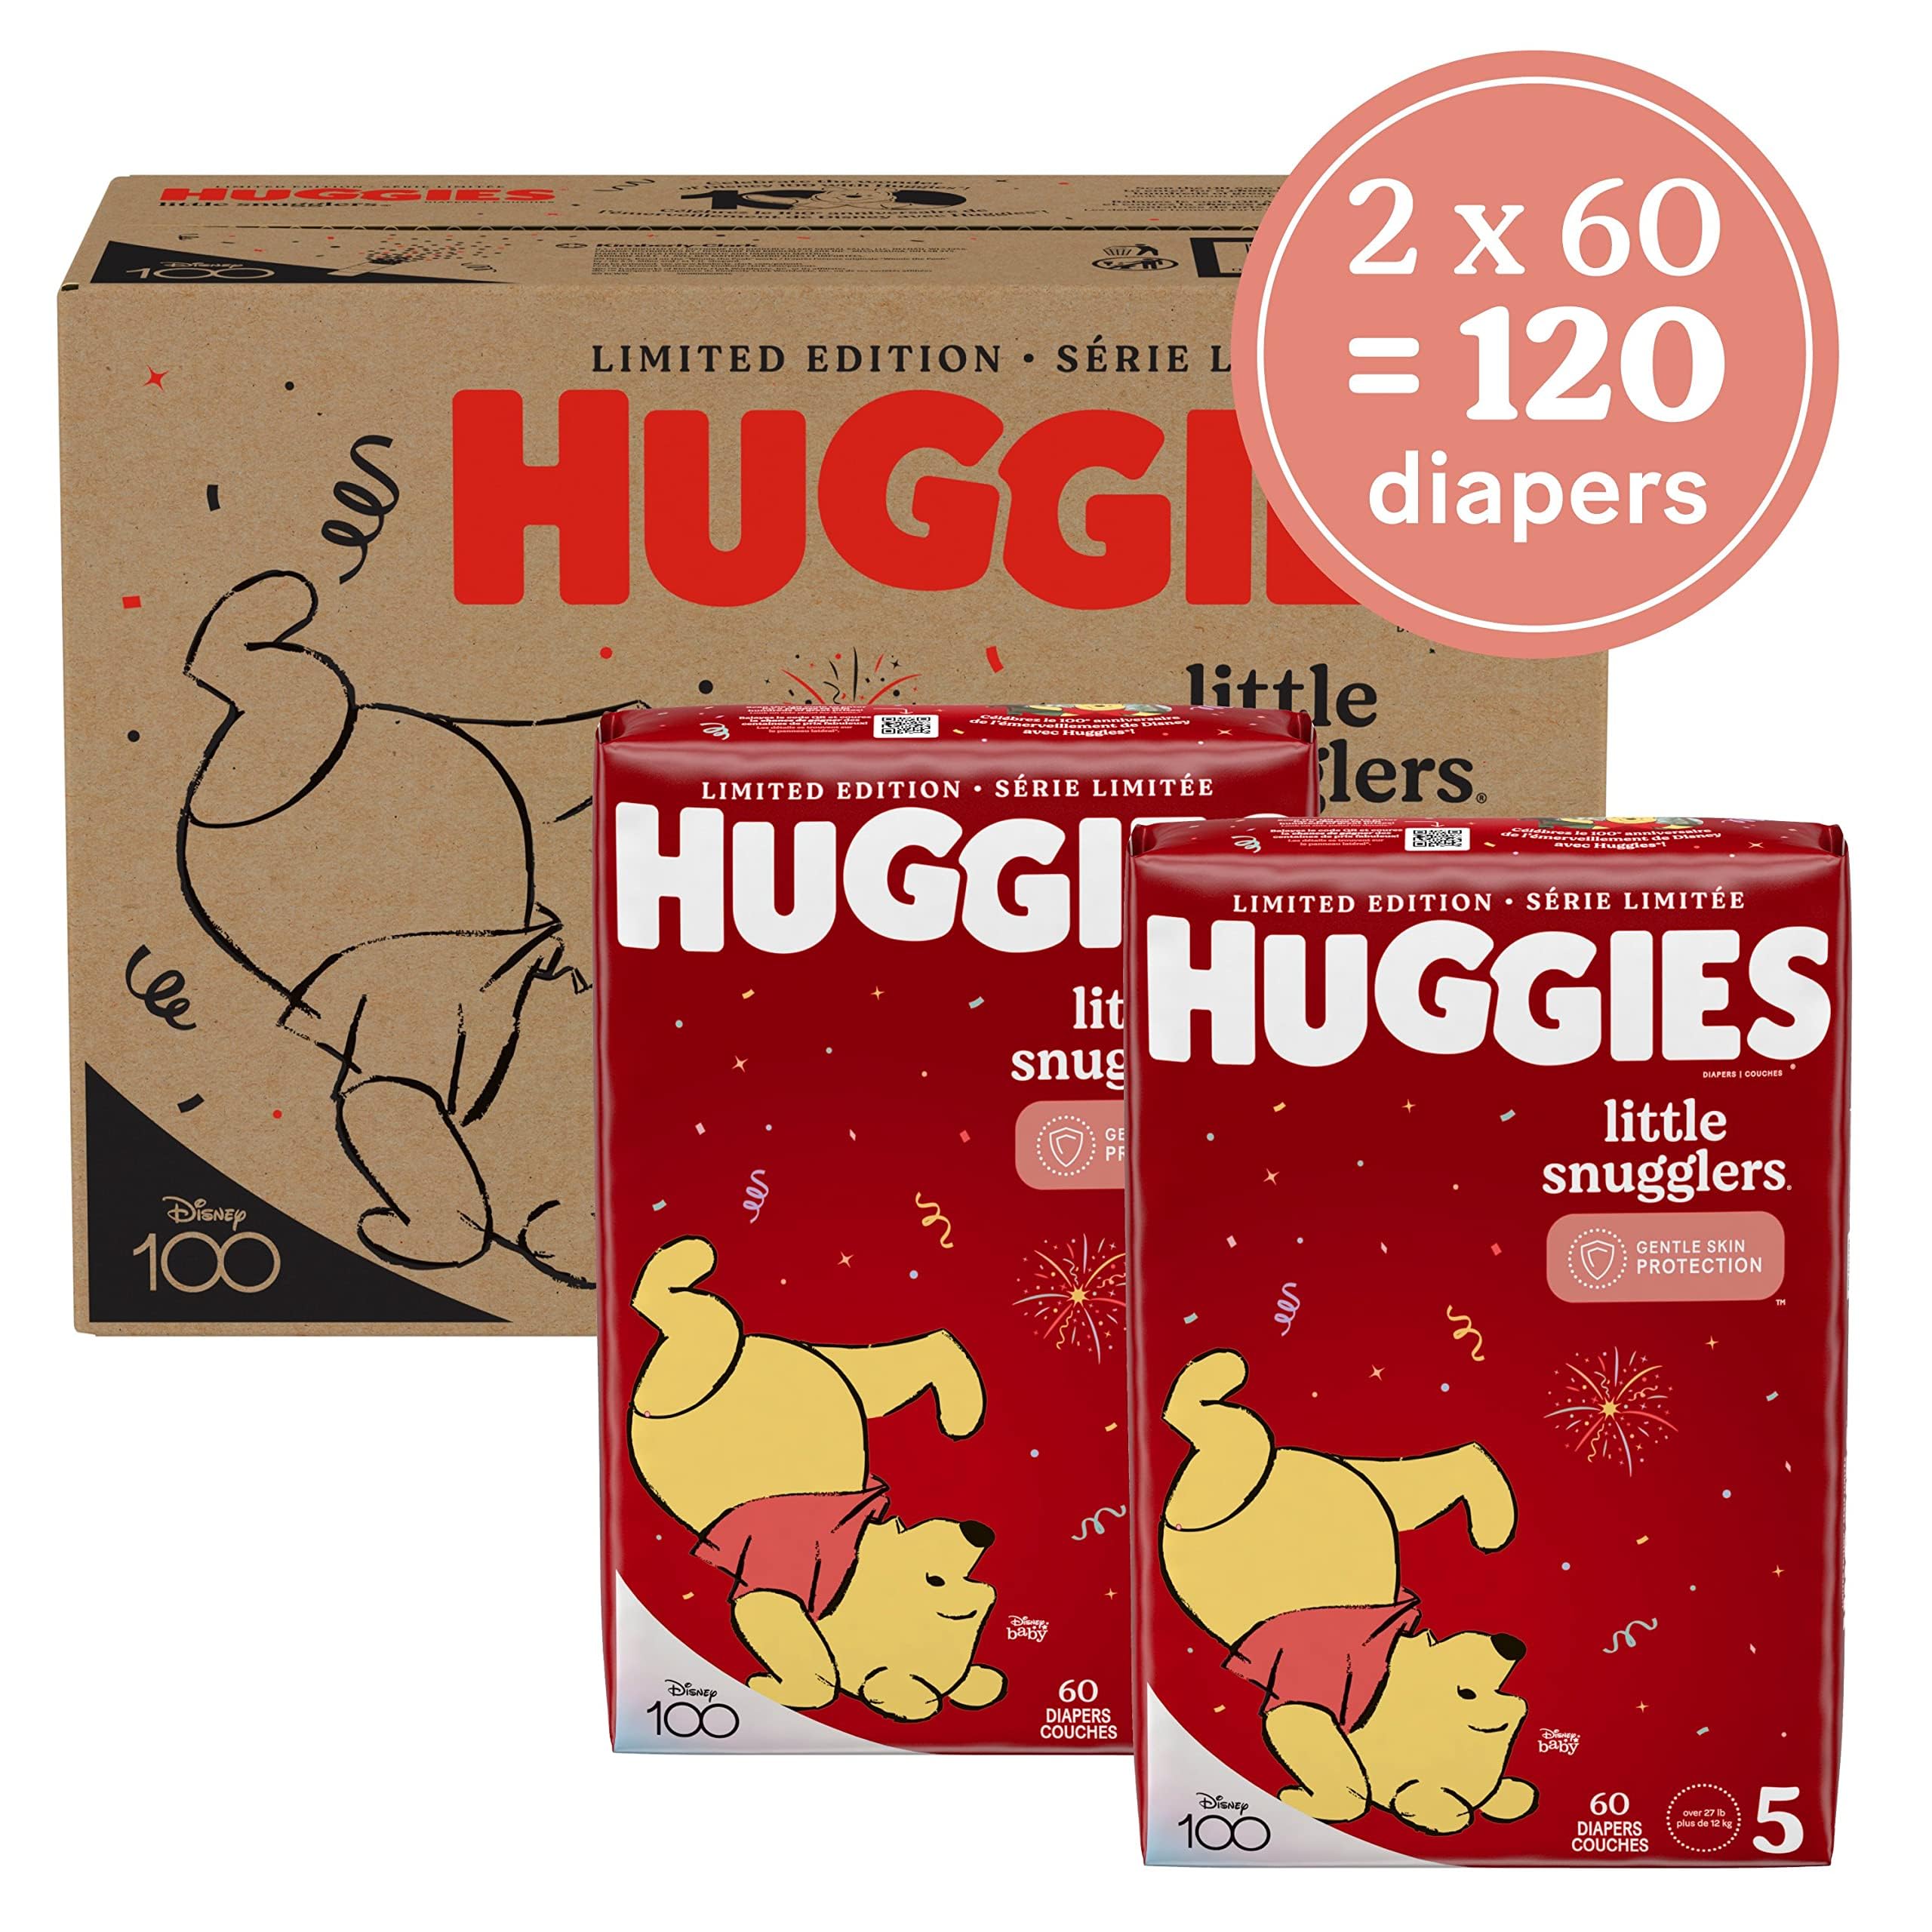 Huggies Little Snugglers Baby Diapers, Size 5 (27+ lbs), 120 Ct